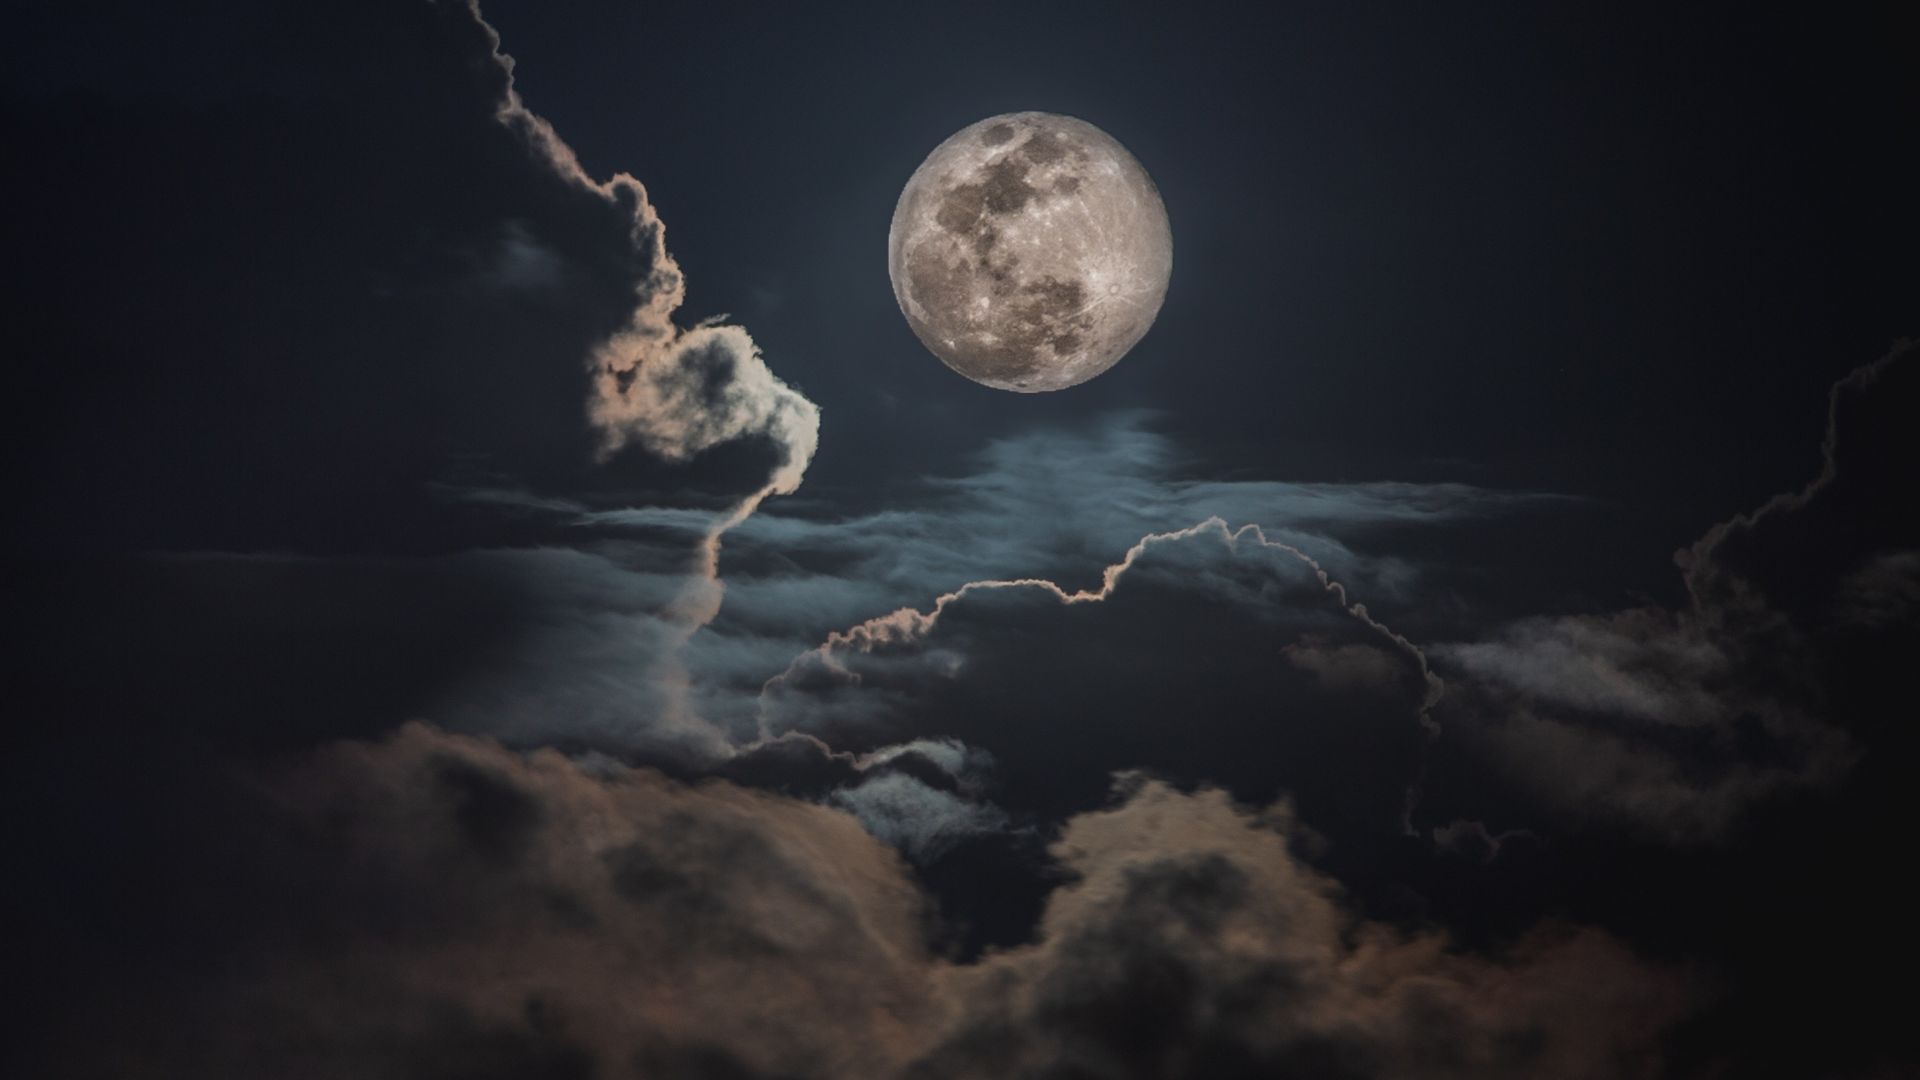 The moon is seen in a dark sky with clouds - 1920x1080, moon